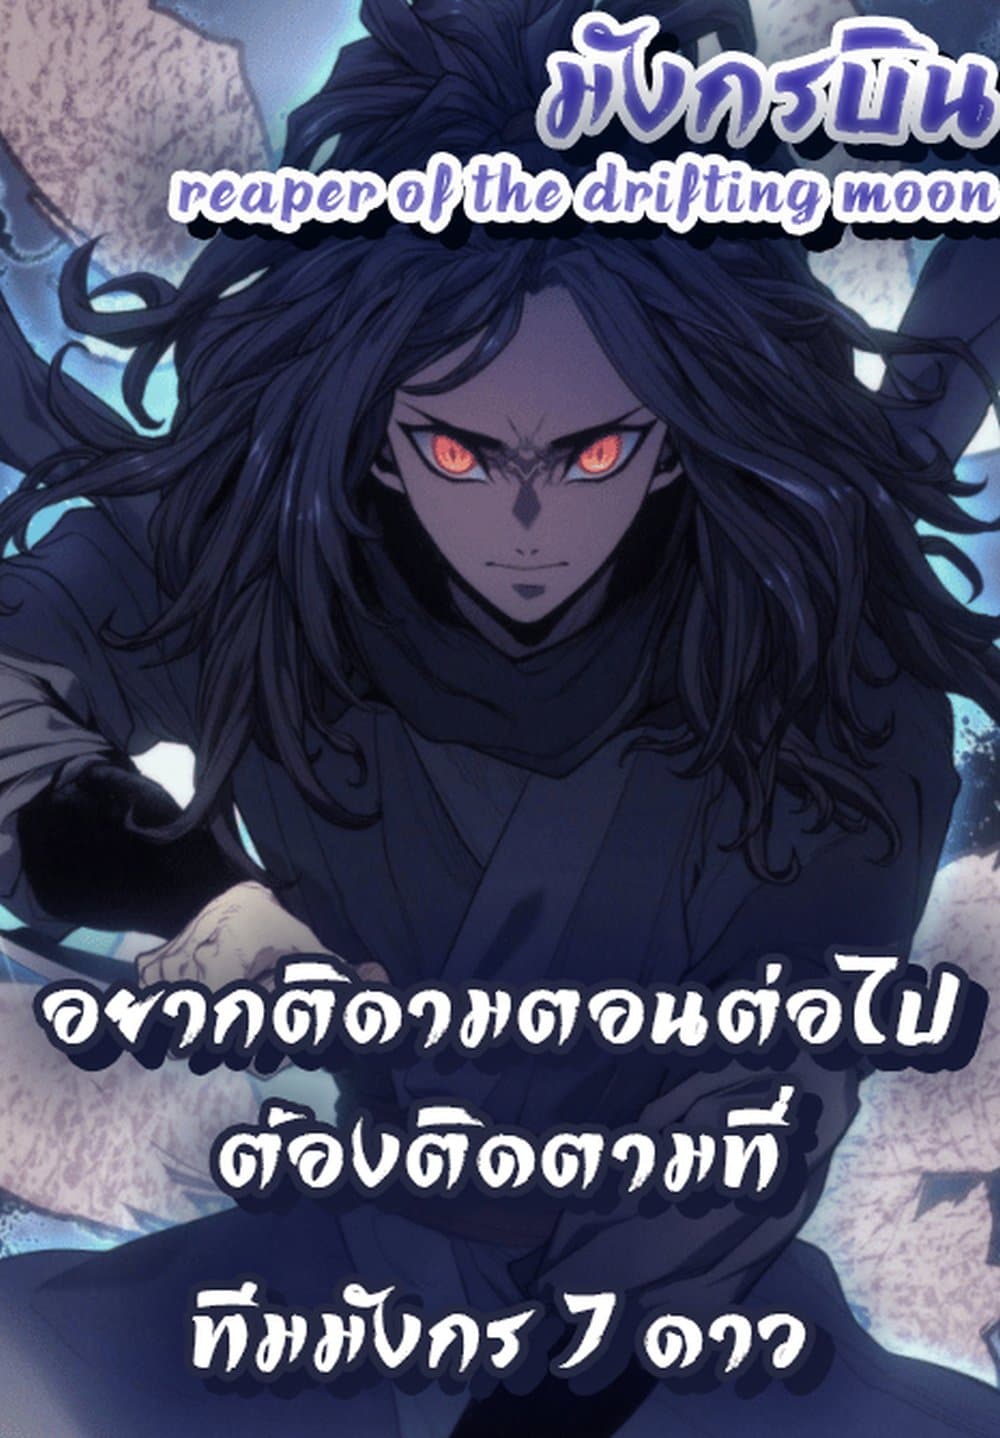 Reaper of the Drifting Moon 5-5